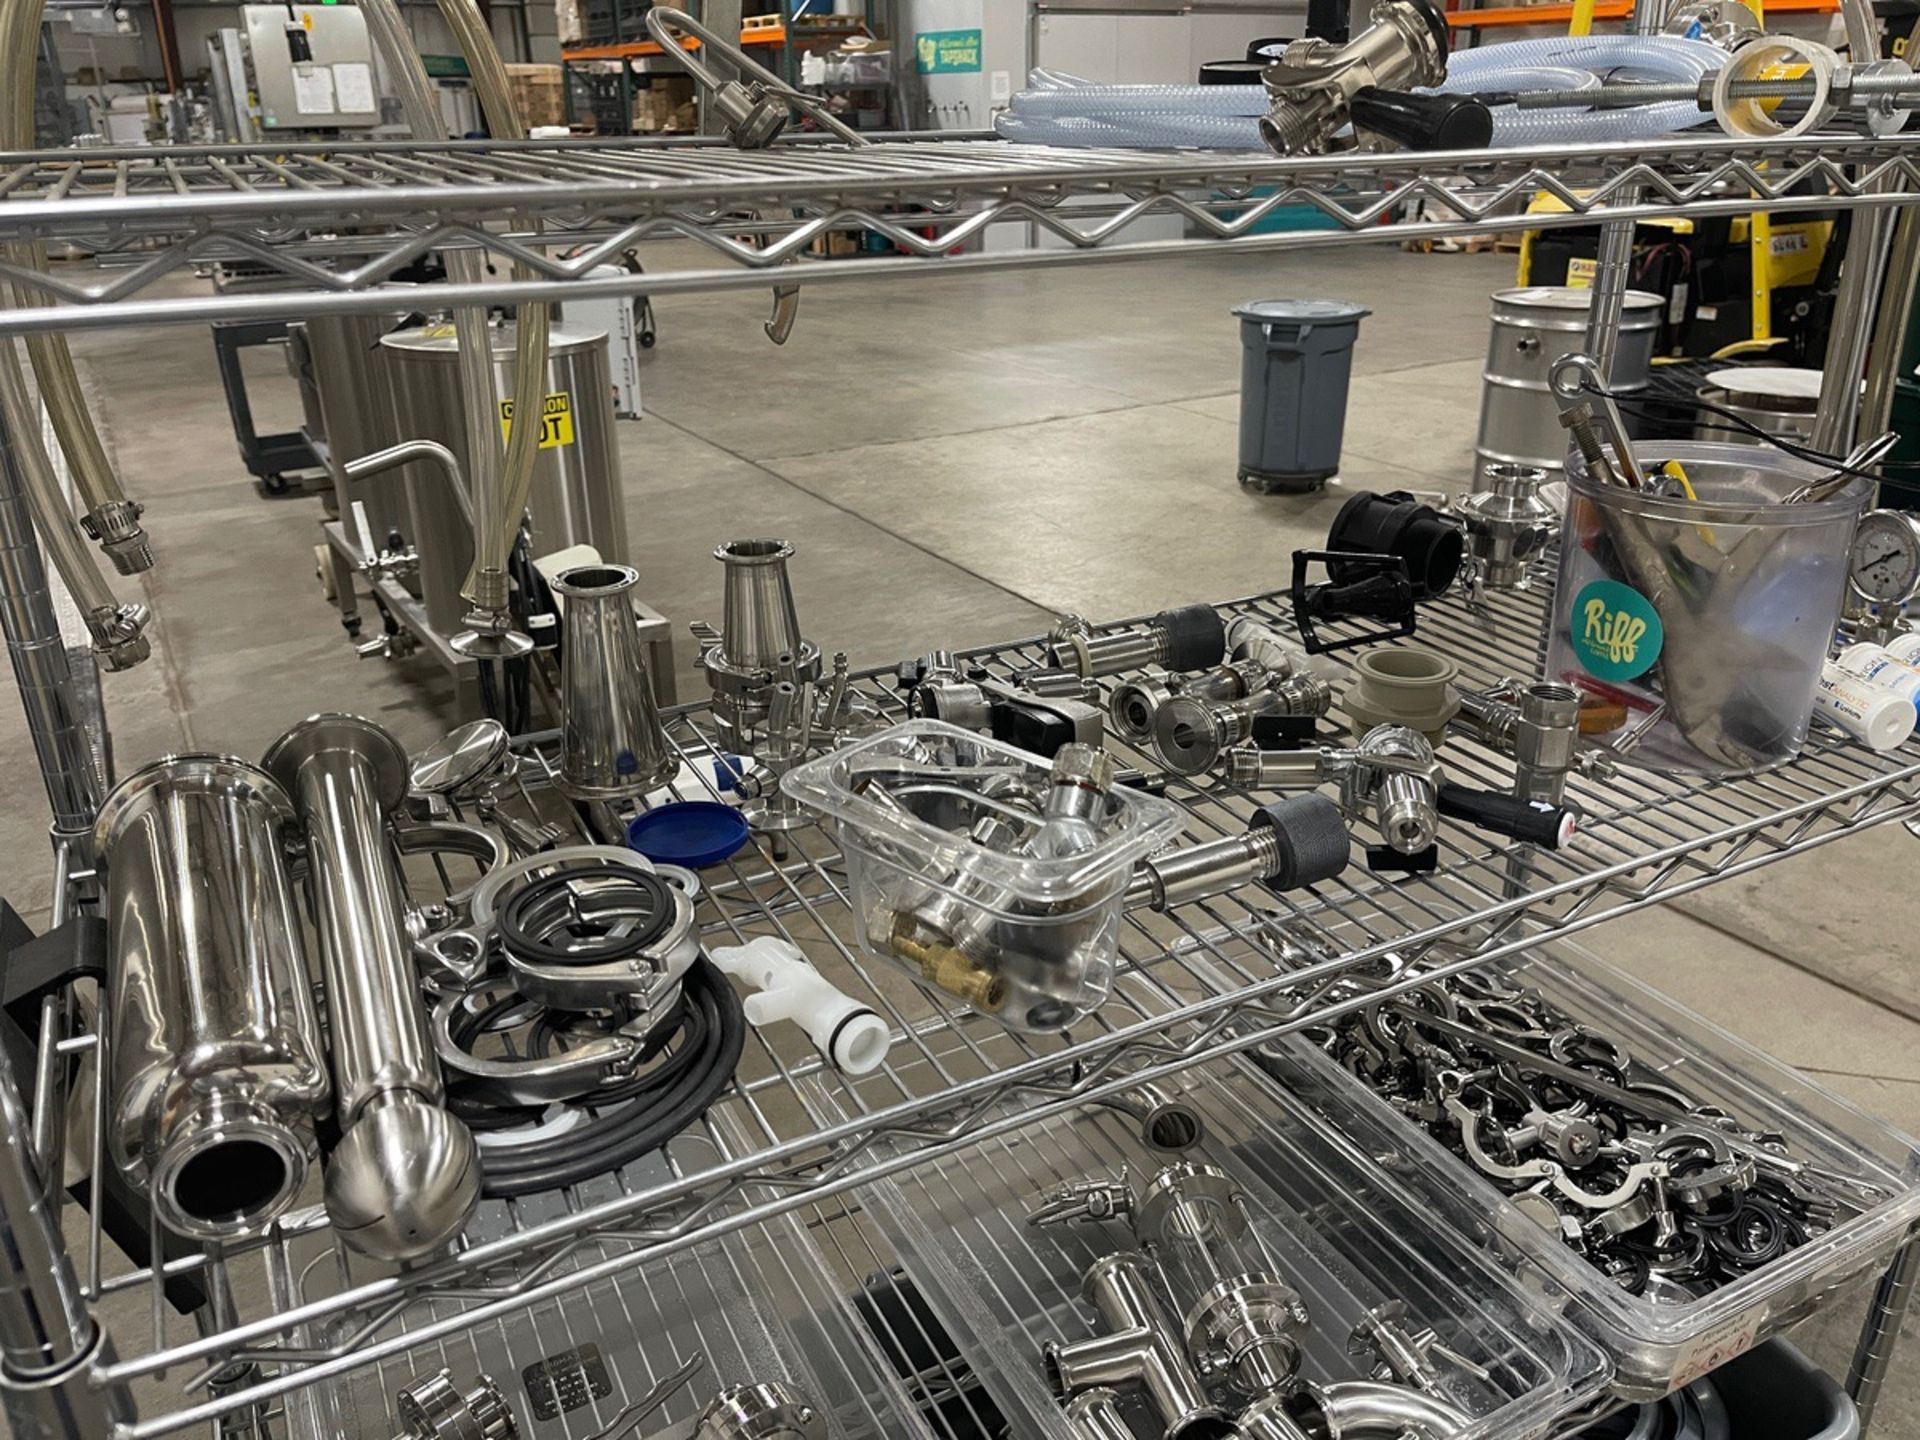 Contents of Rack (Rack Not Included), Stainless Steel Brewing Parts Including | Rig Fee $100 - Image 7 of 7